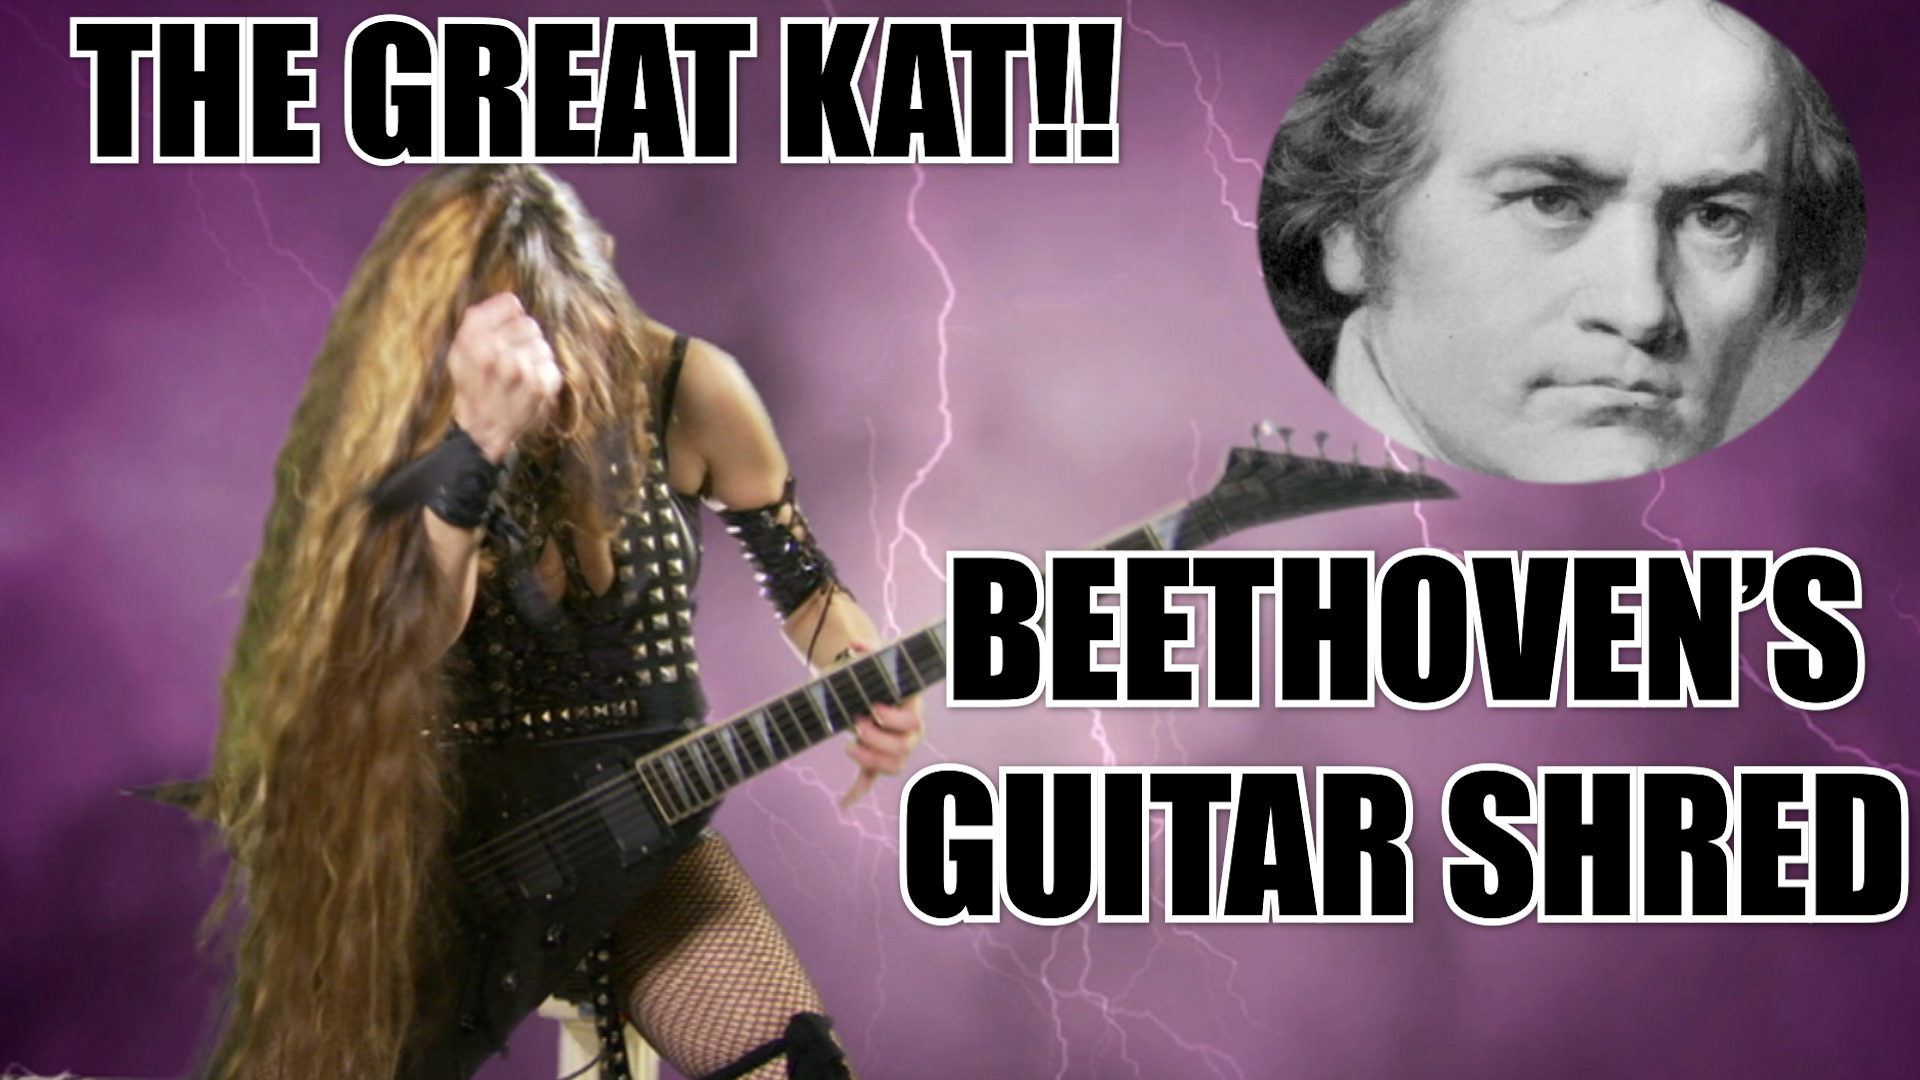 The Great KAT "BEETHOVEN'S GUITAR SHRED" DVD